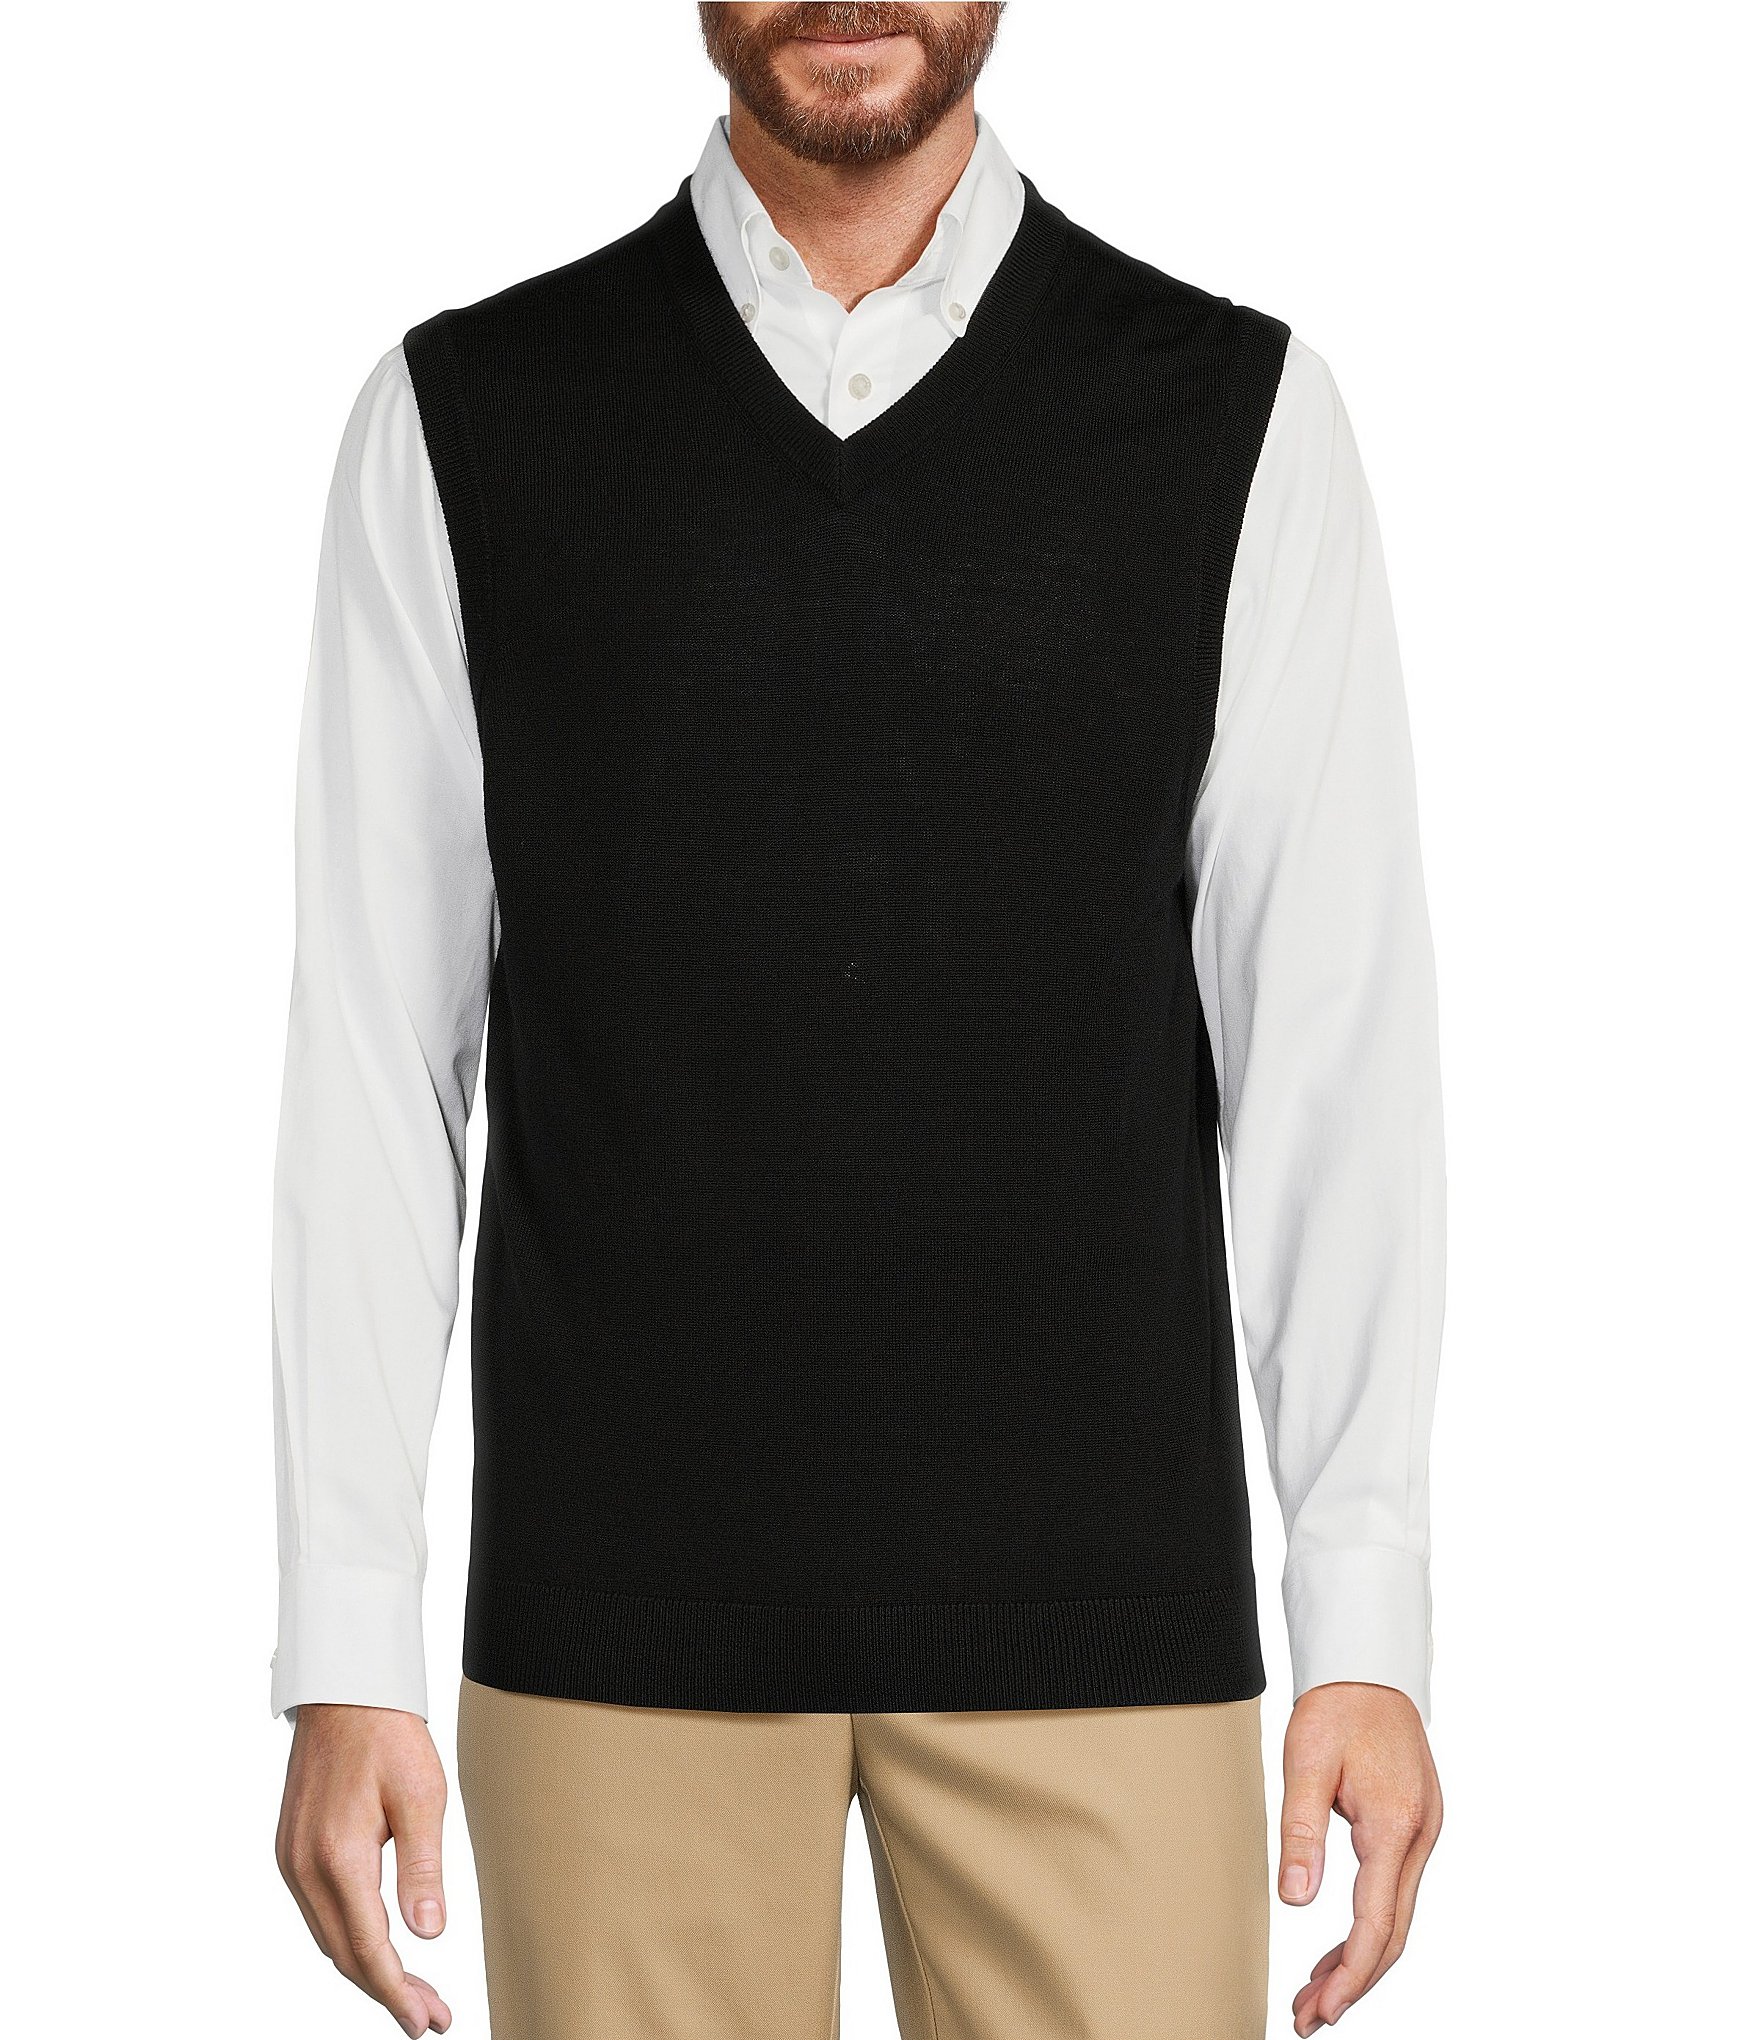 V-Neck Sleeveless Sweater Vest with Pocket – The Merry Moore